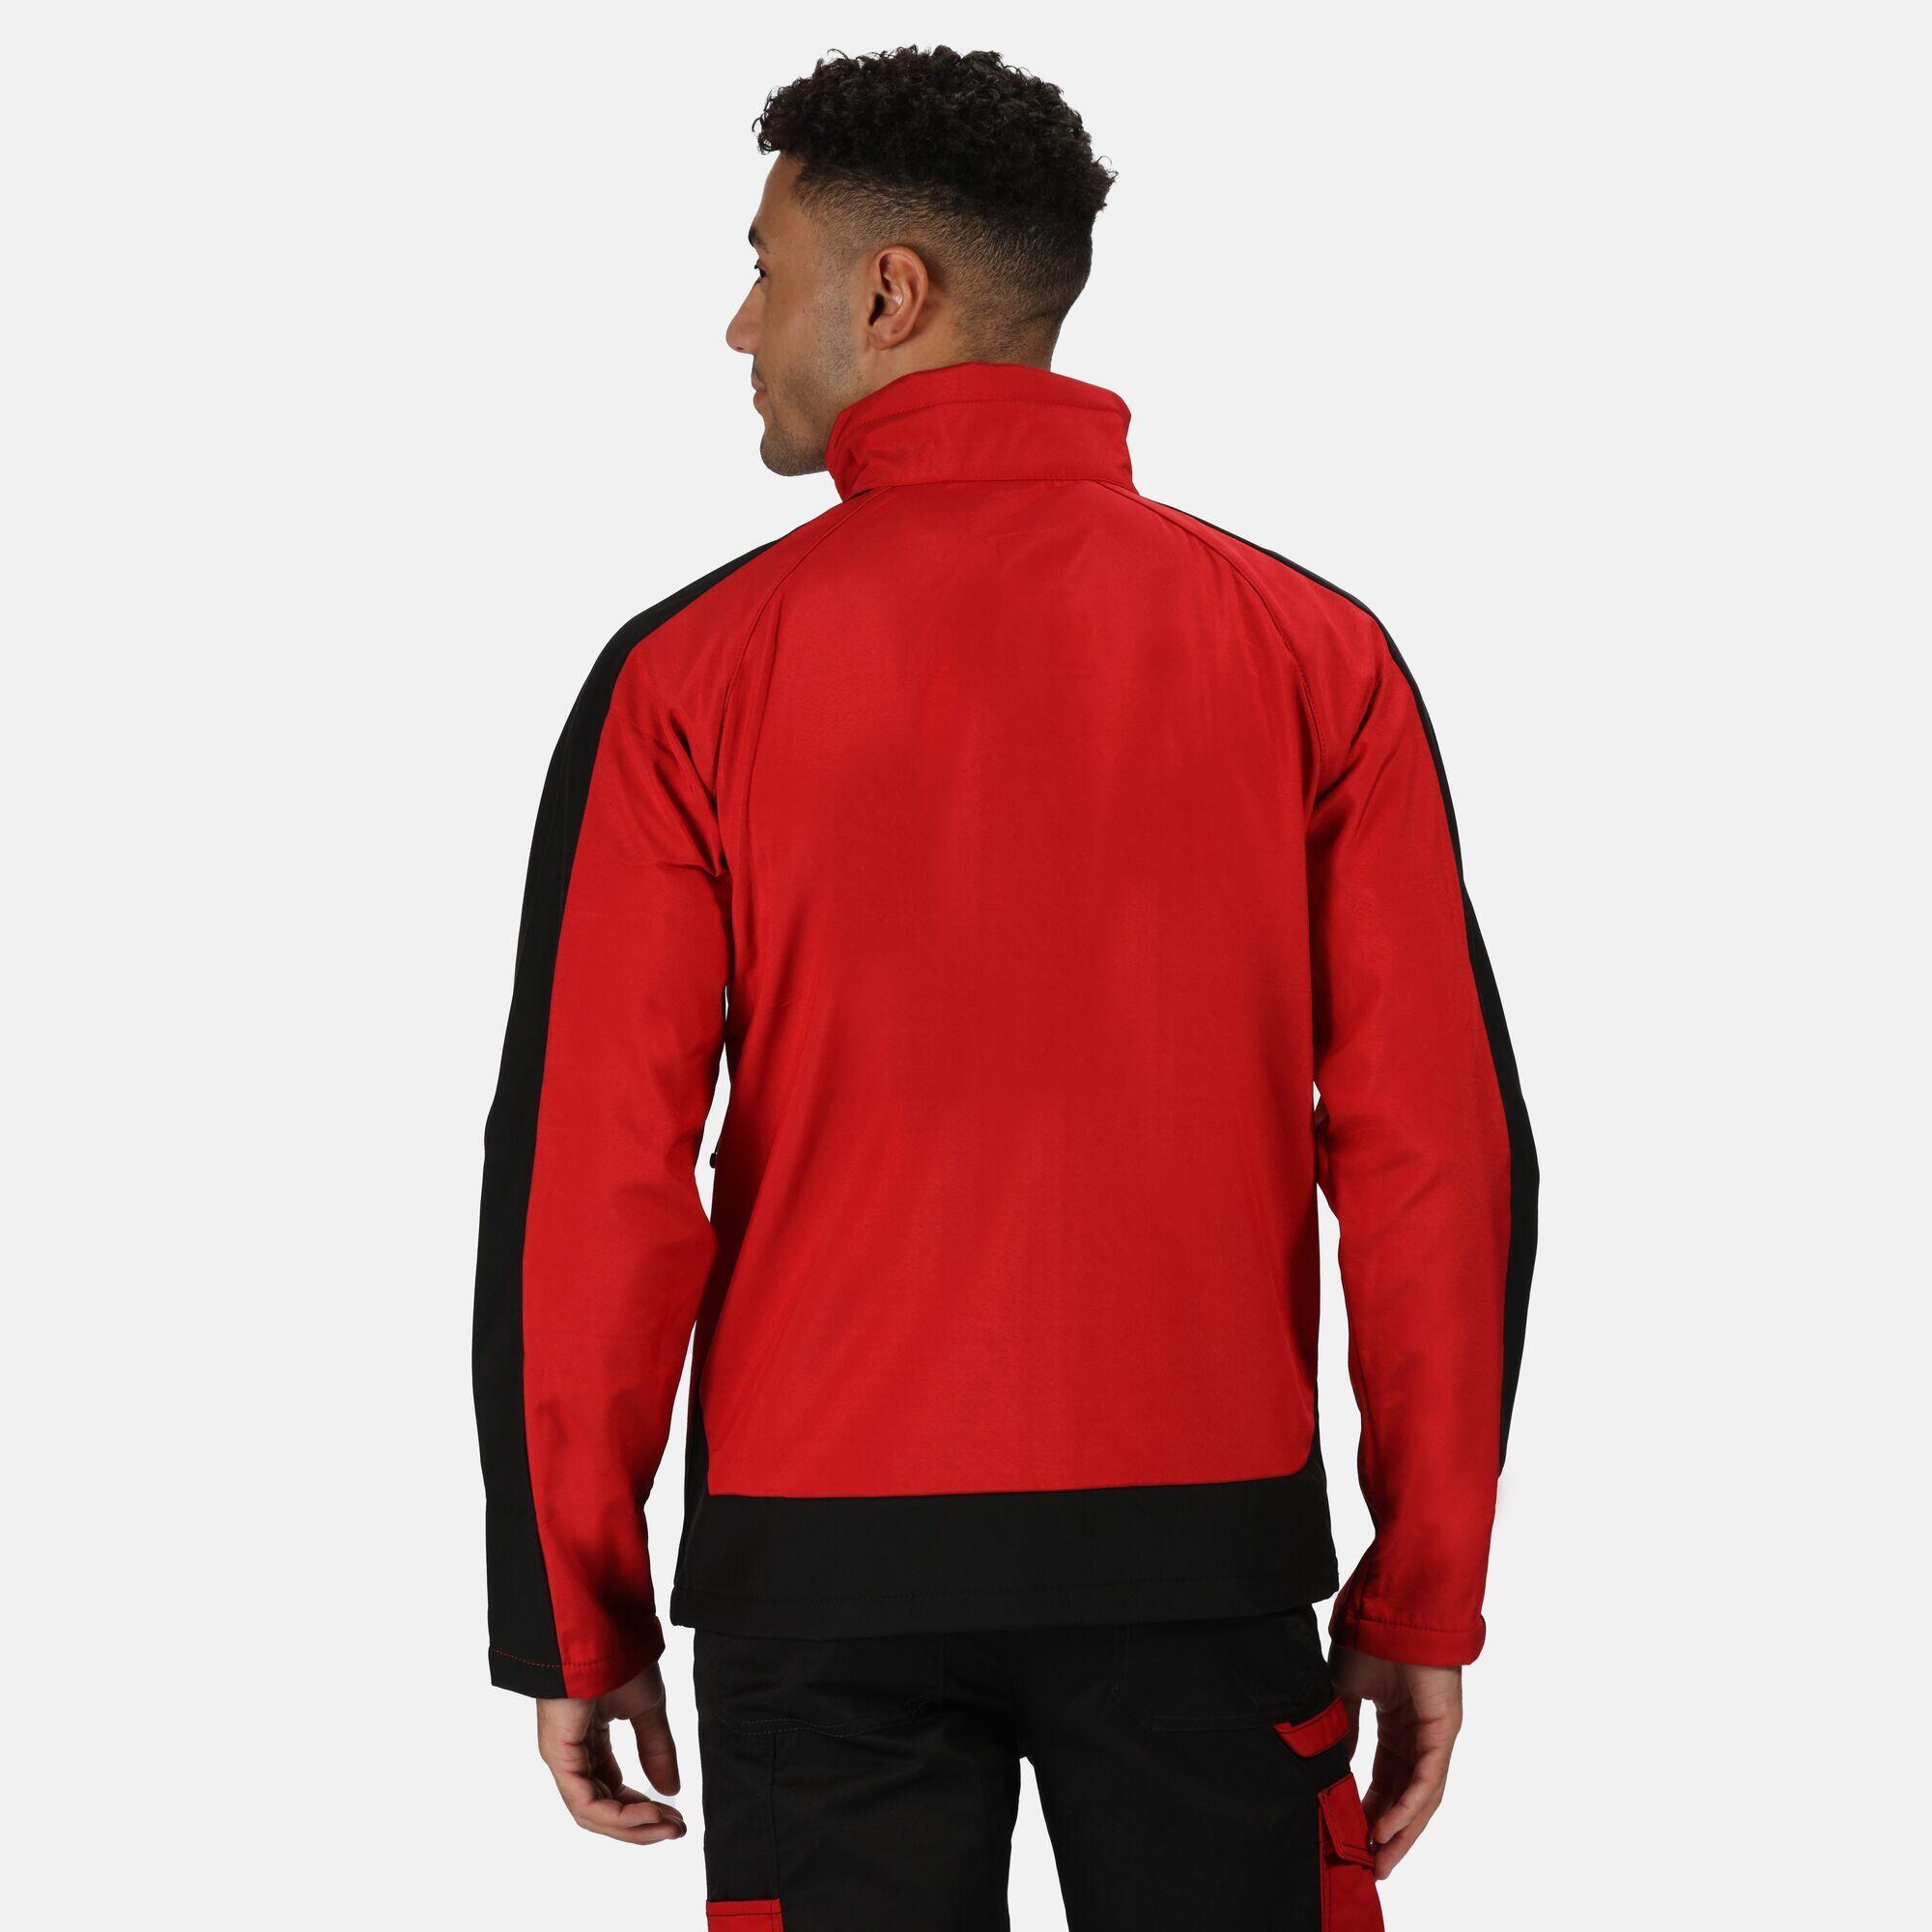 Mens Contrast 3 Layer Softshell Full Zip Jacket (Orient Red/Jet Black) 4/5